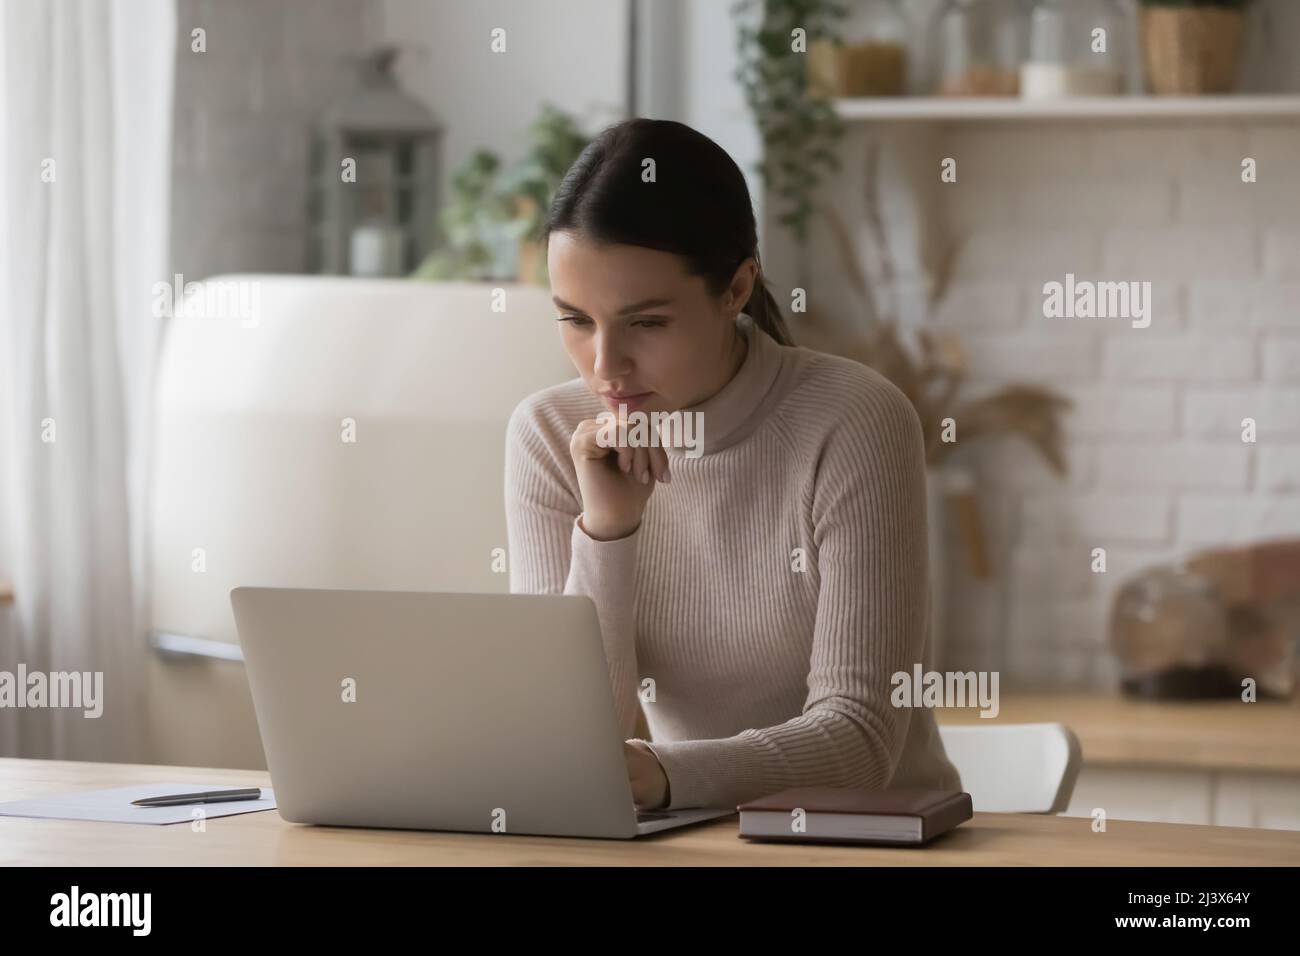 Thoughtful serious freelance worker woman working from home kitchen Stock Photo